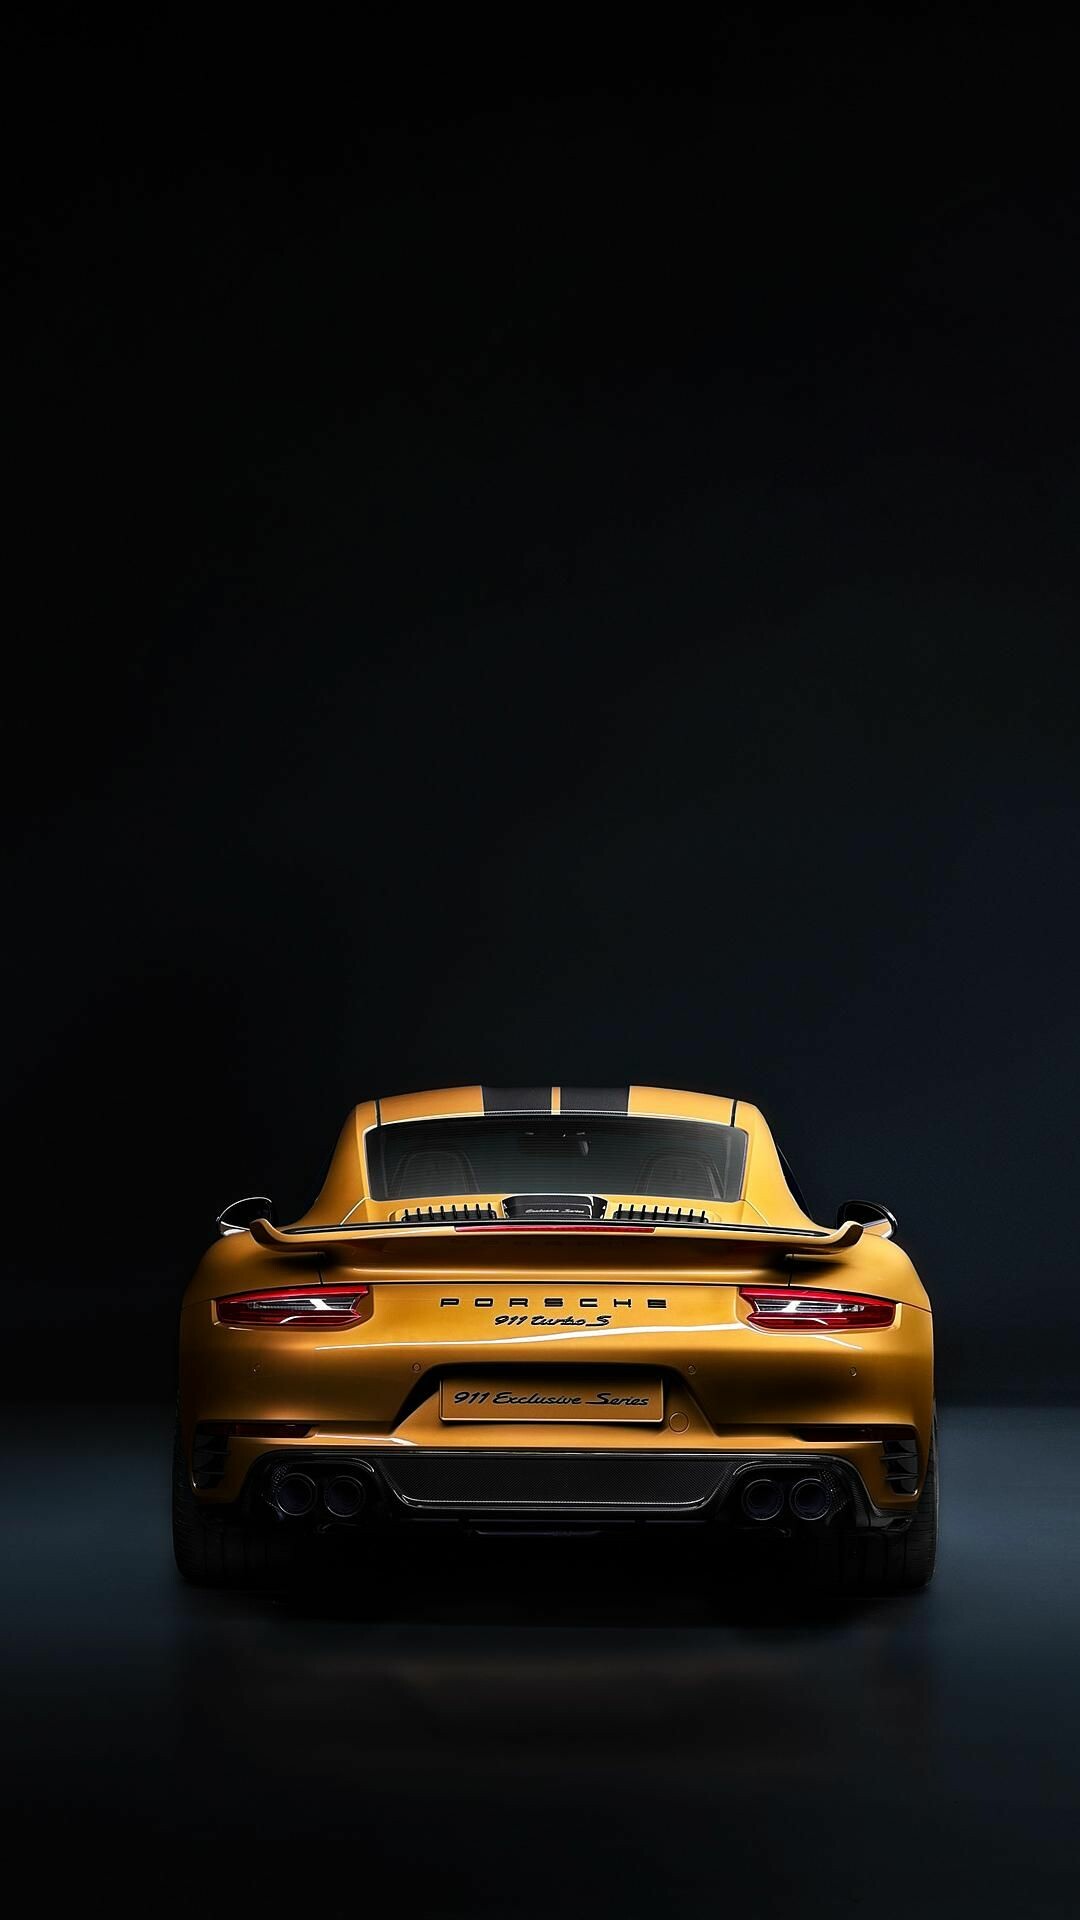 Porsche 911: 911 Turbo Exclusive Series, A facelifted GT3 RS was introduced In February 2018. 1080x1920 Full HD Background.